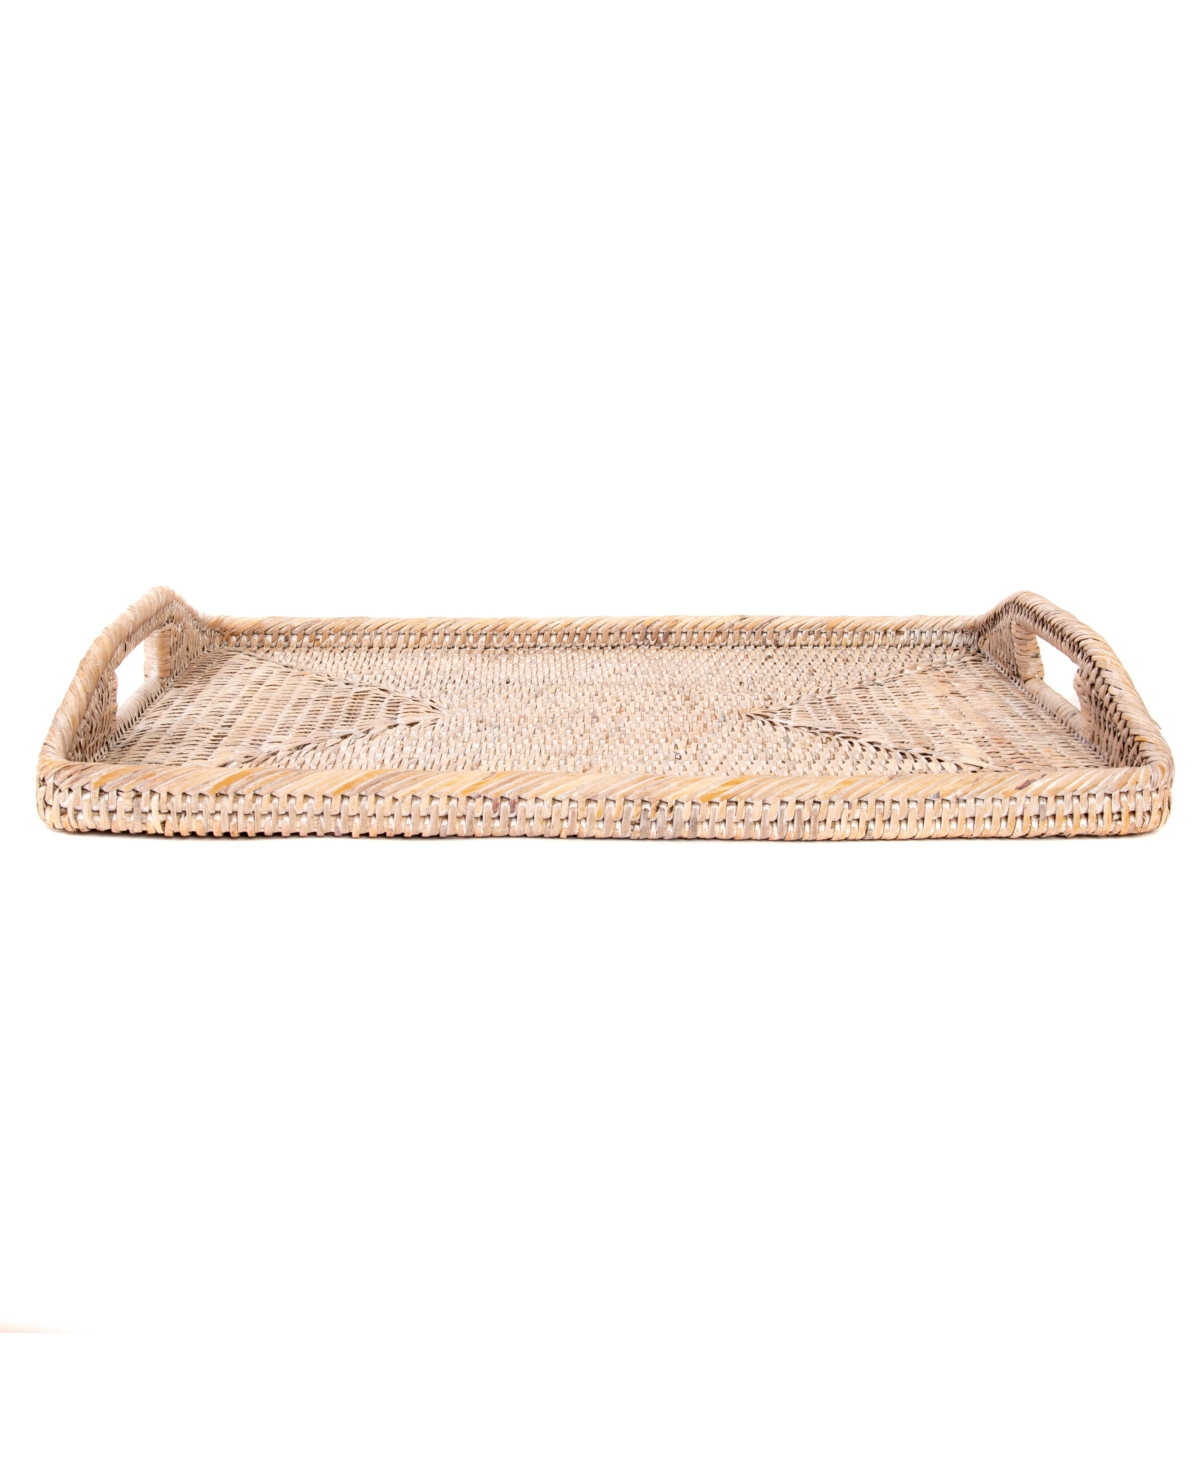 Artifacts Trading Company Artifacts Rattan 17" Rectangular Tray In Off-white